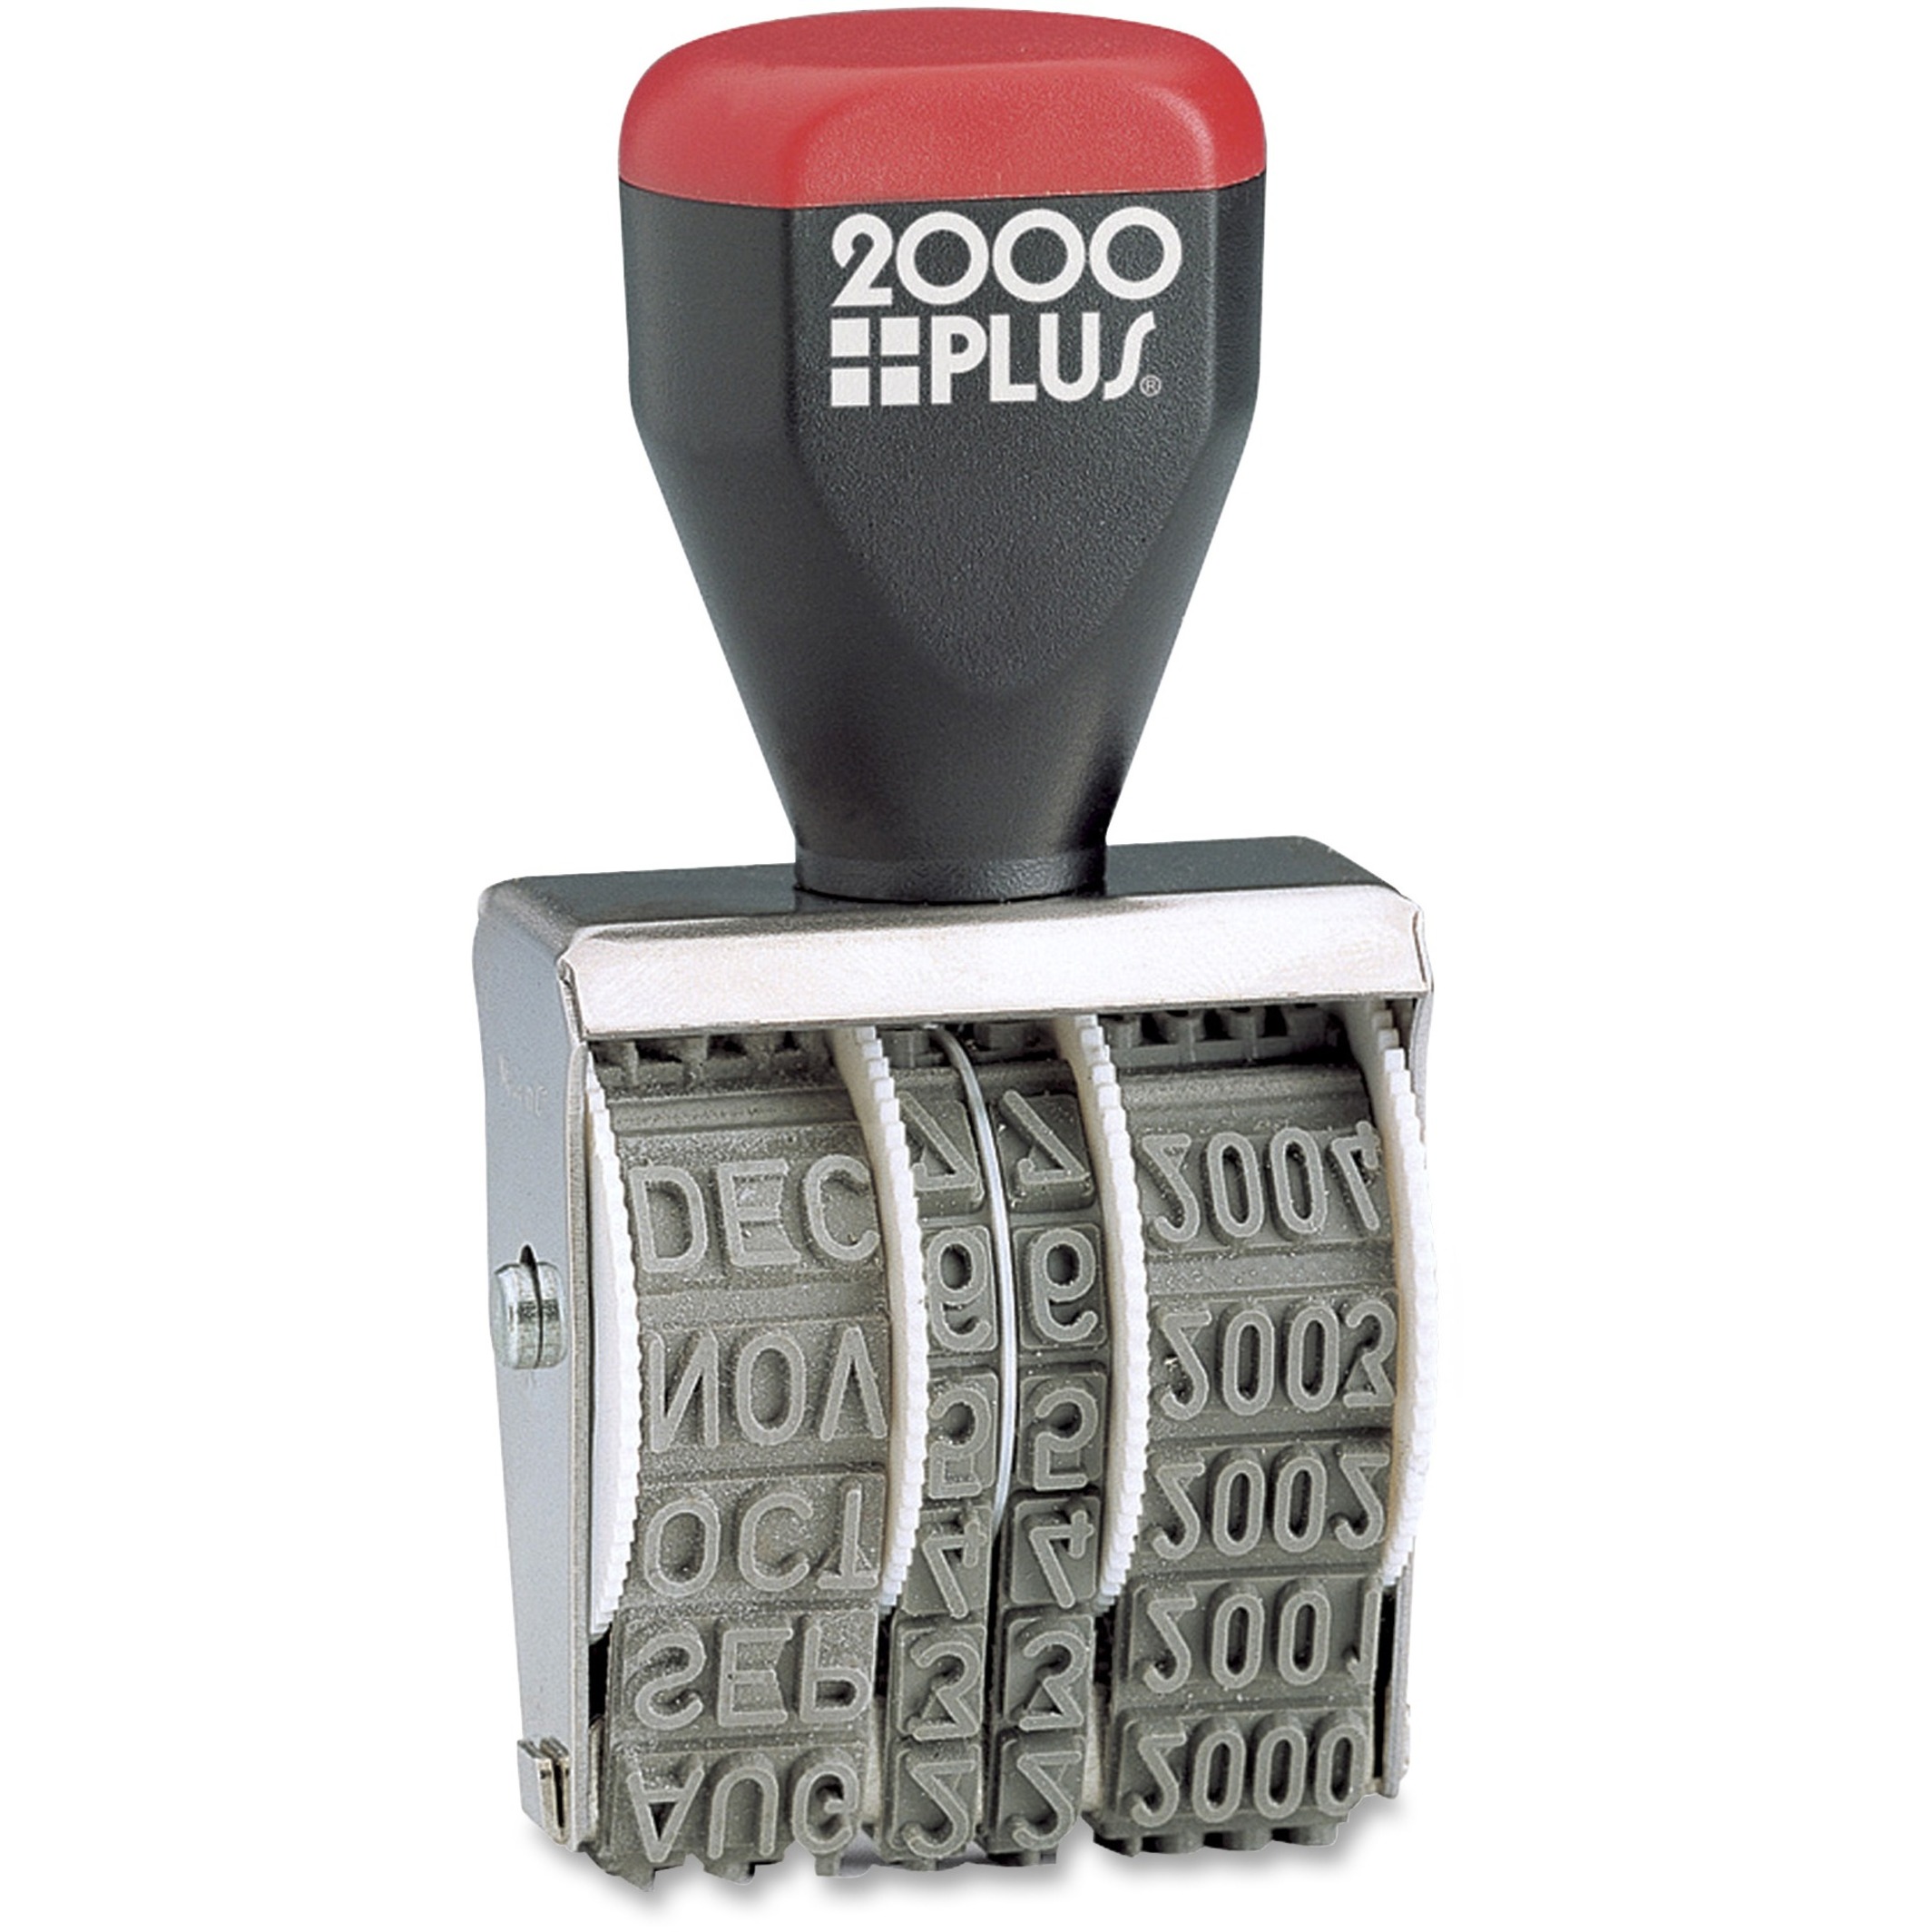 COSCO 2000 Plus Four-band Date Stamp - image 1 of 3